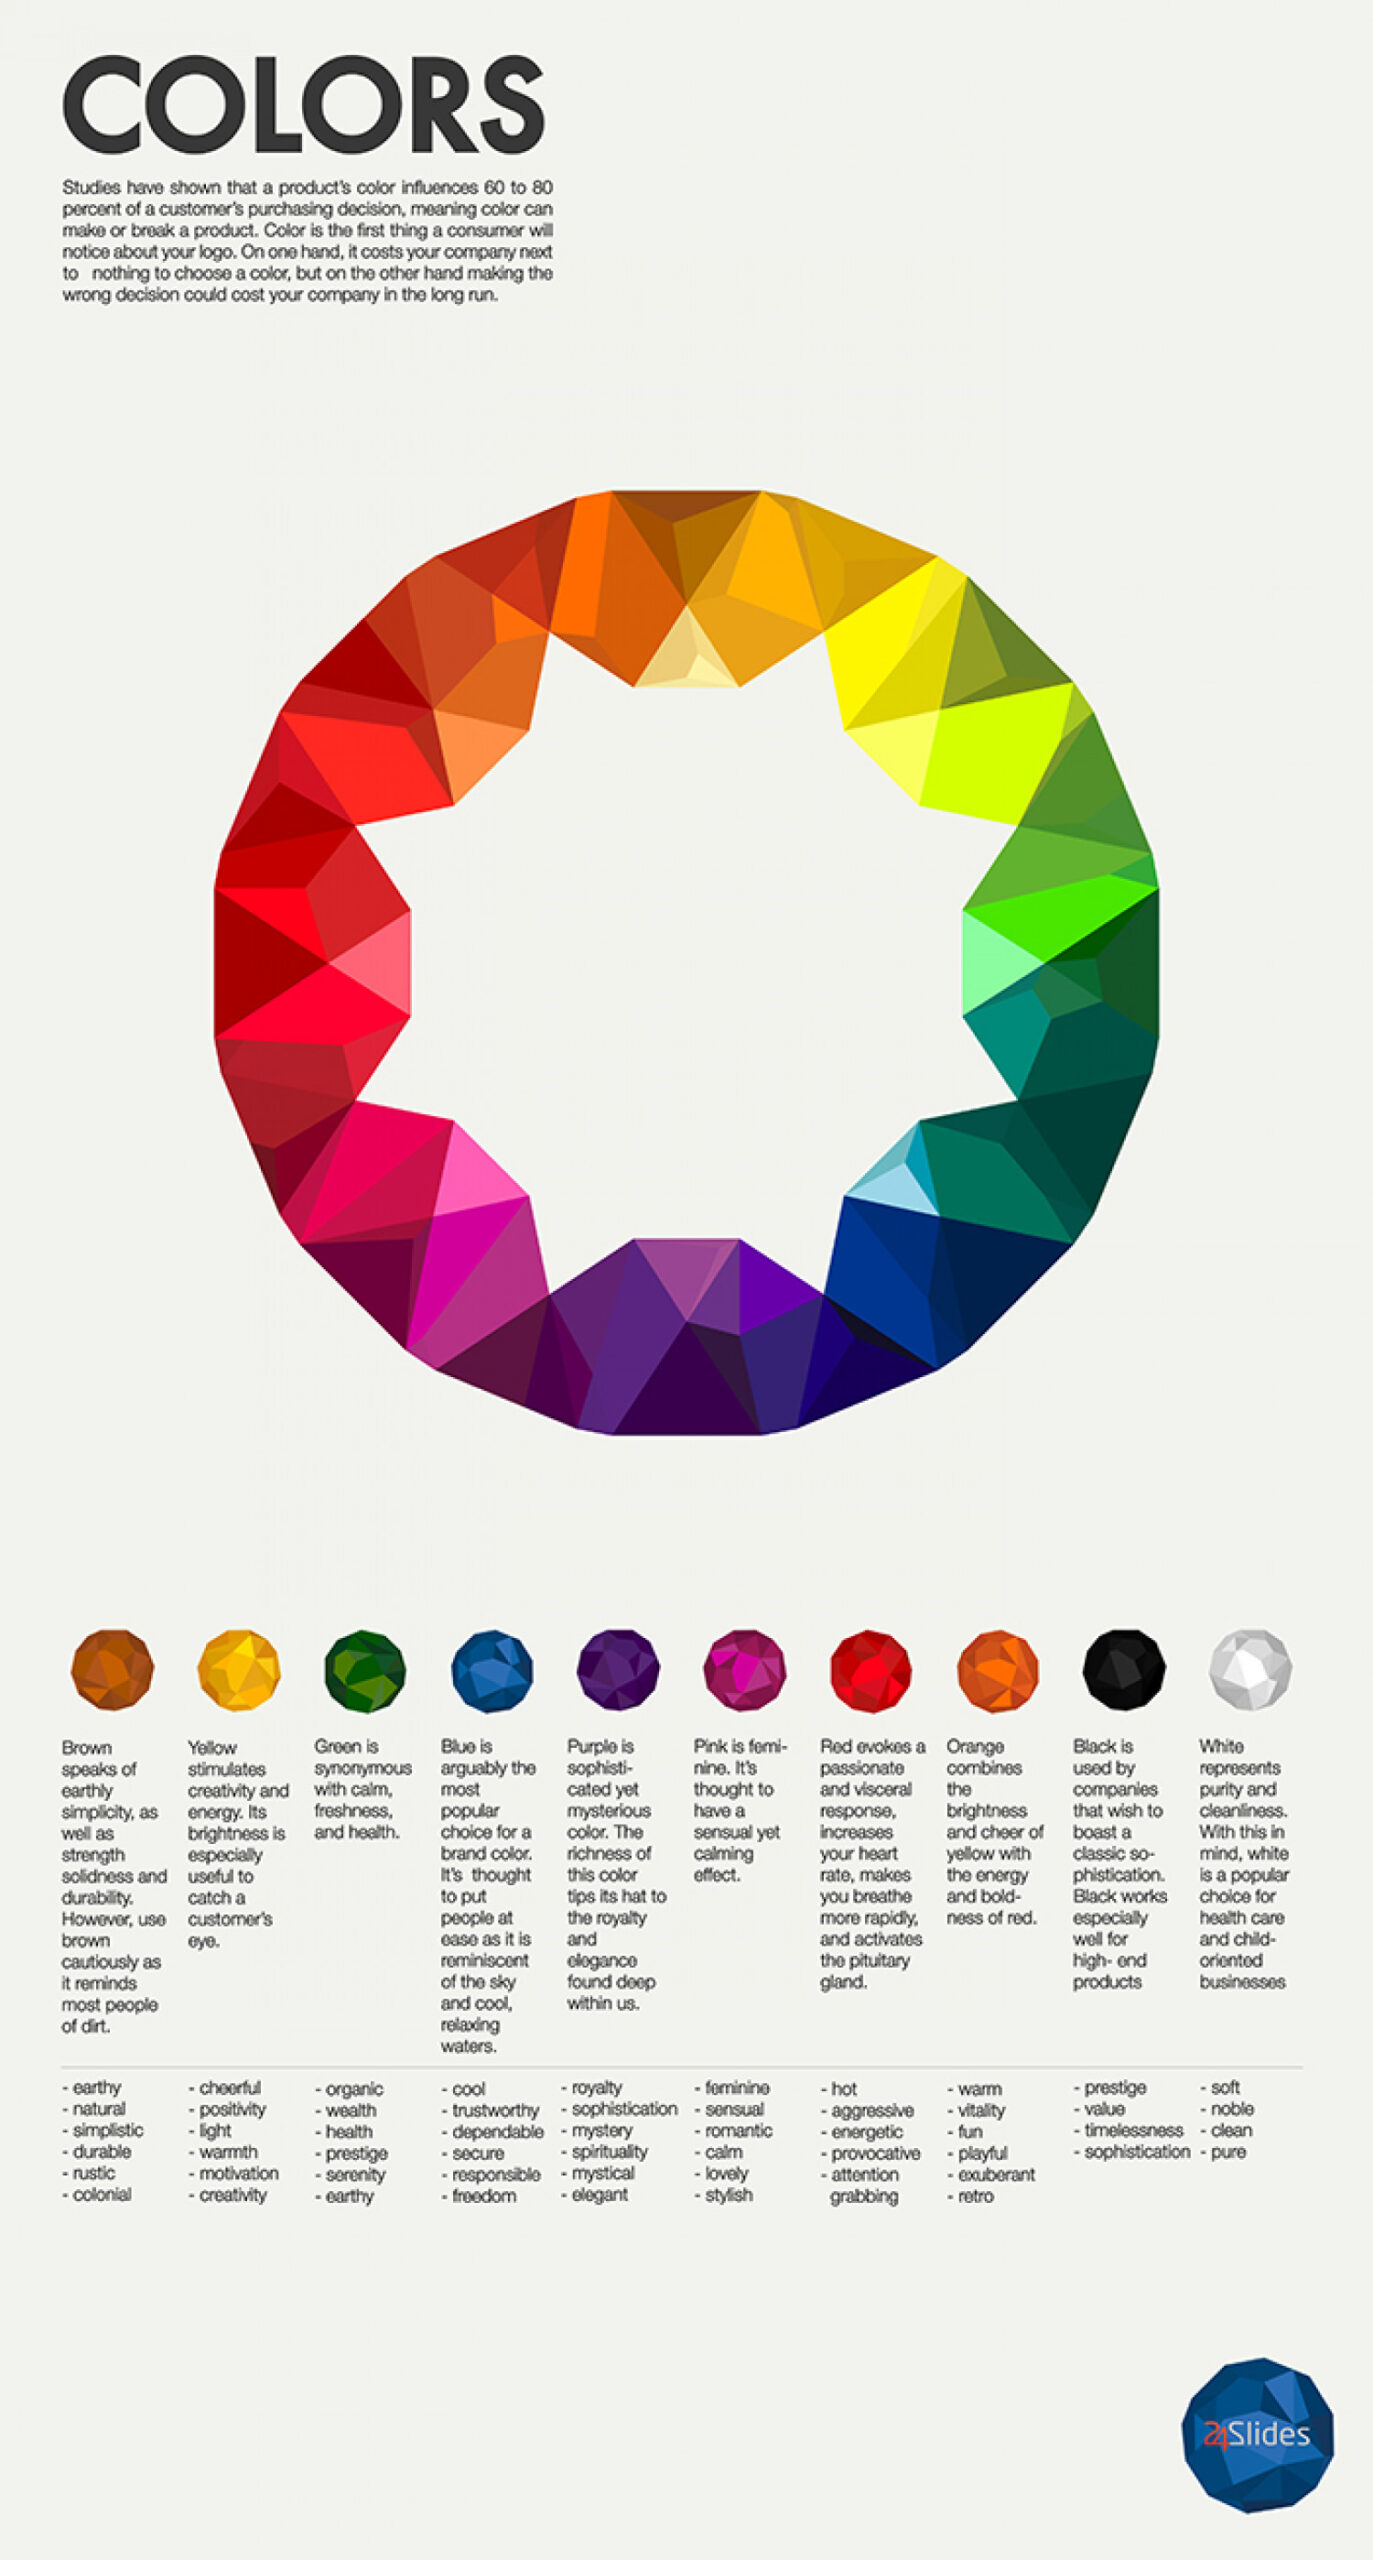 50 Best Infographics for Web Designers - Color Theory Edition